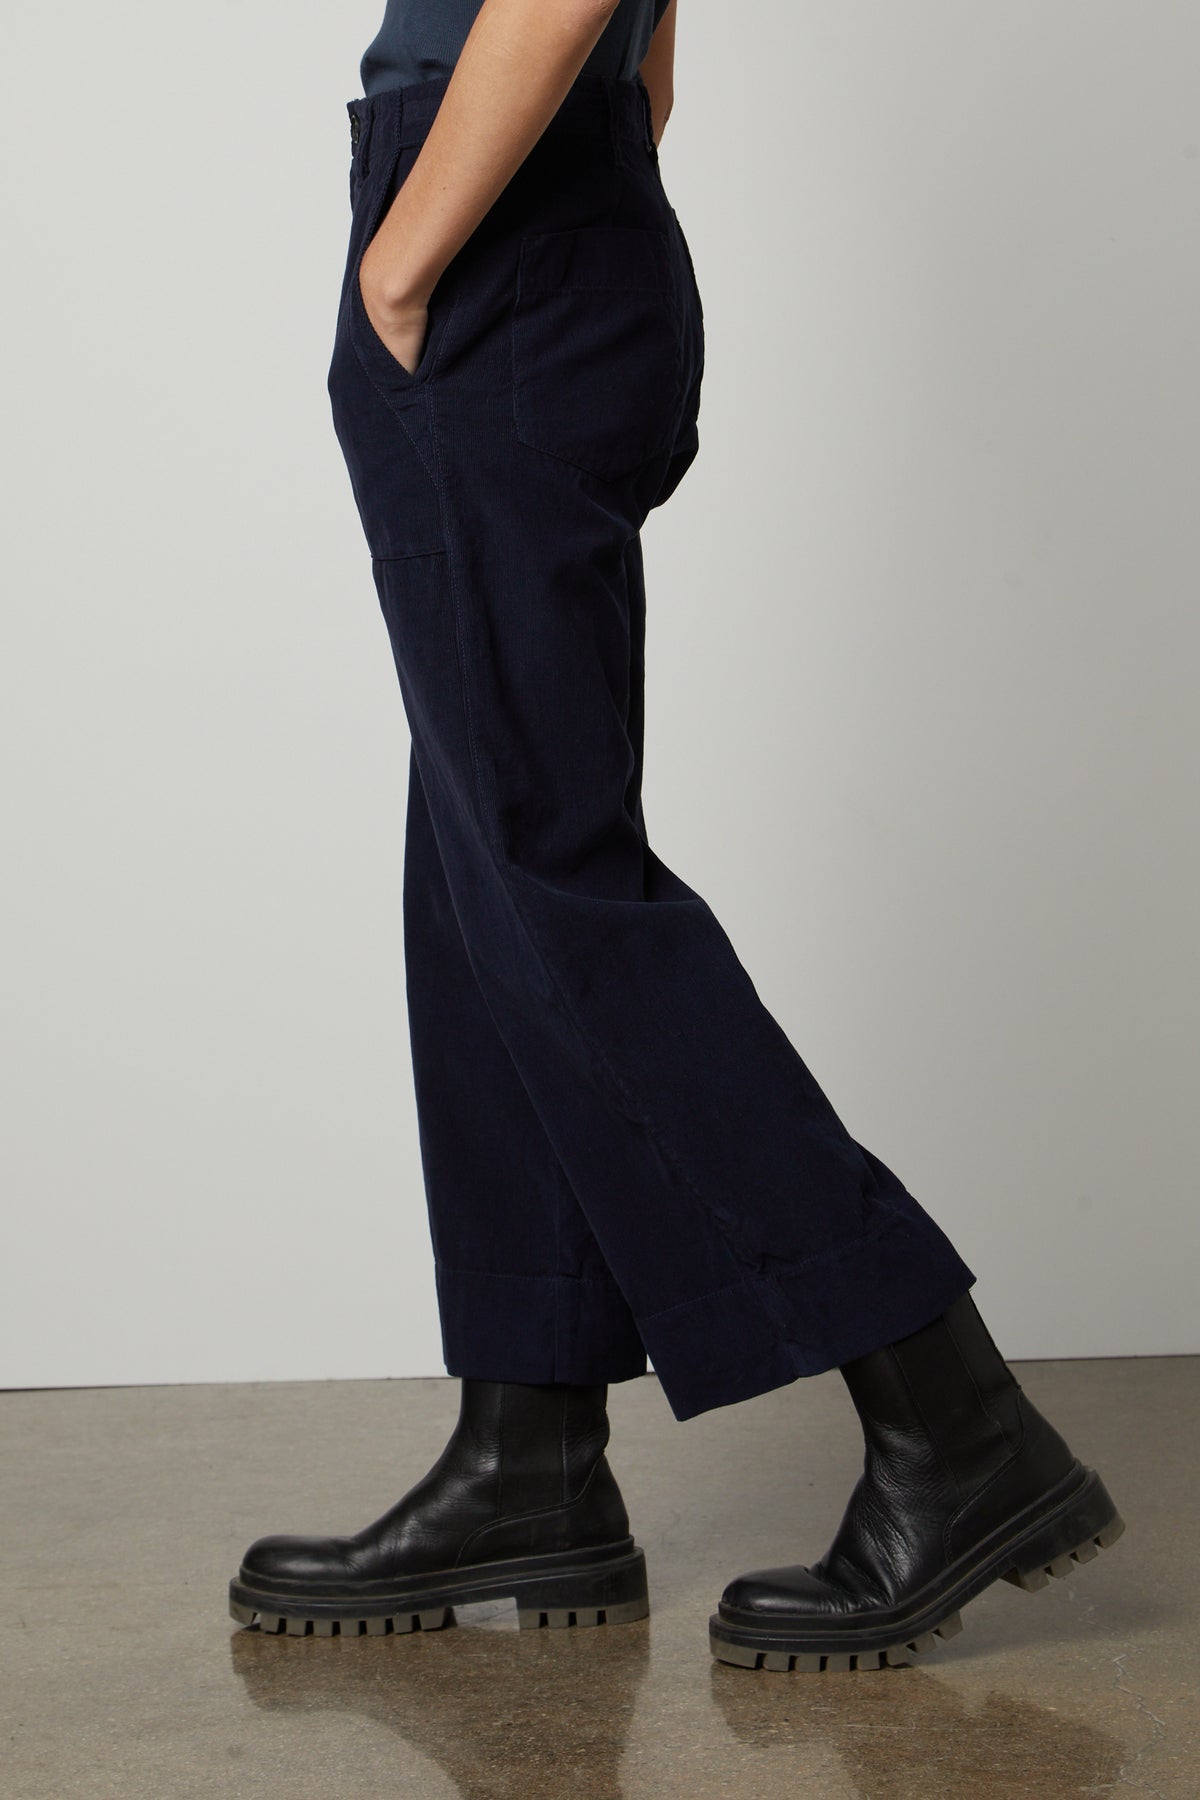 A woman in a blue shirt and black boots is standing in front of a white wall wearing the Velvet by Graham & Spencer VERA CORDUROY WIDE LEG PANT.-26727714193601